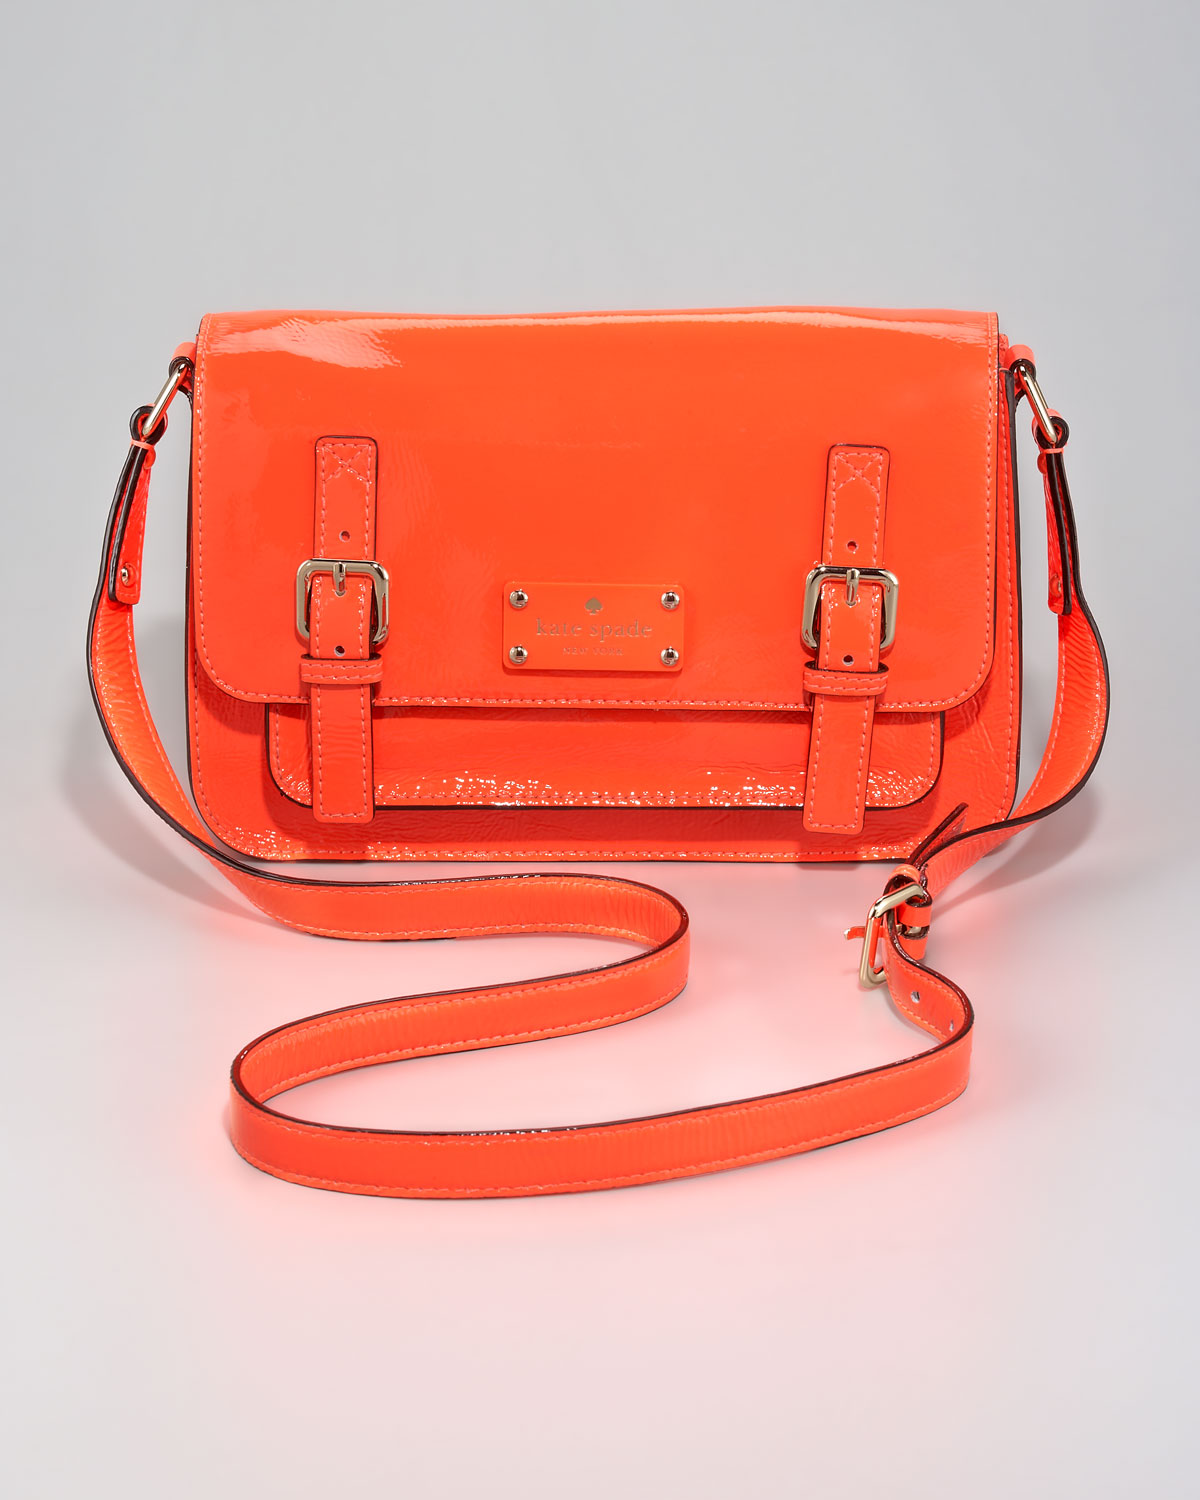 Lyst - Kate Spade New York Patent Leather Scout Crossbody Bag in Orange